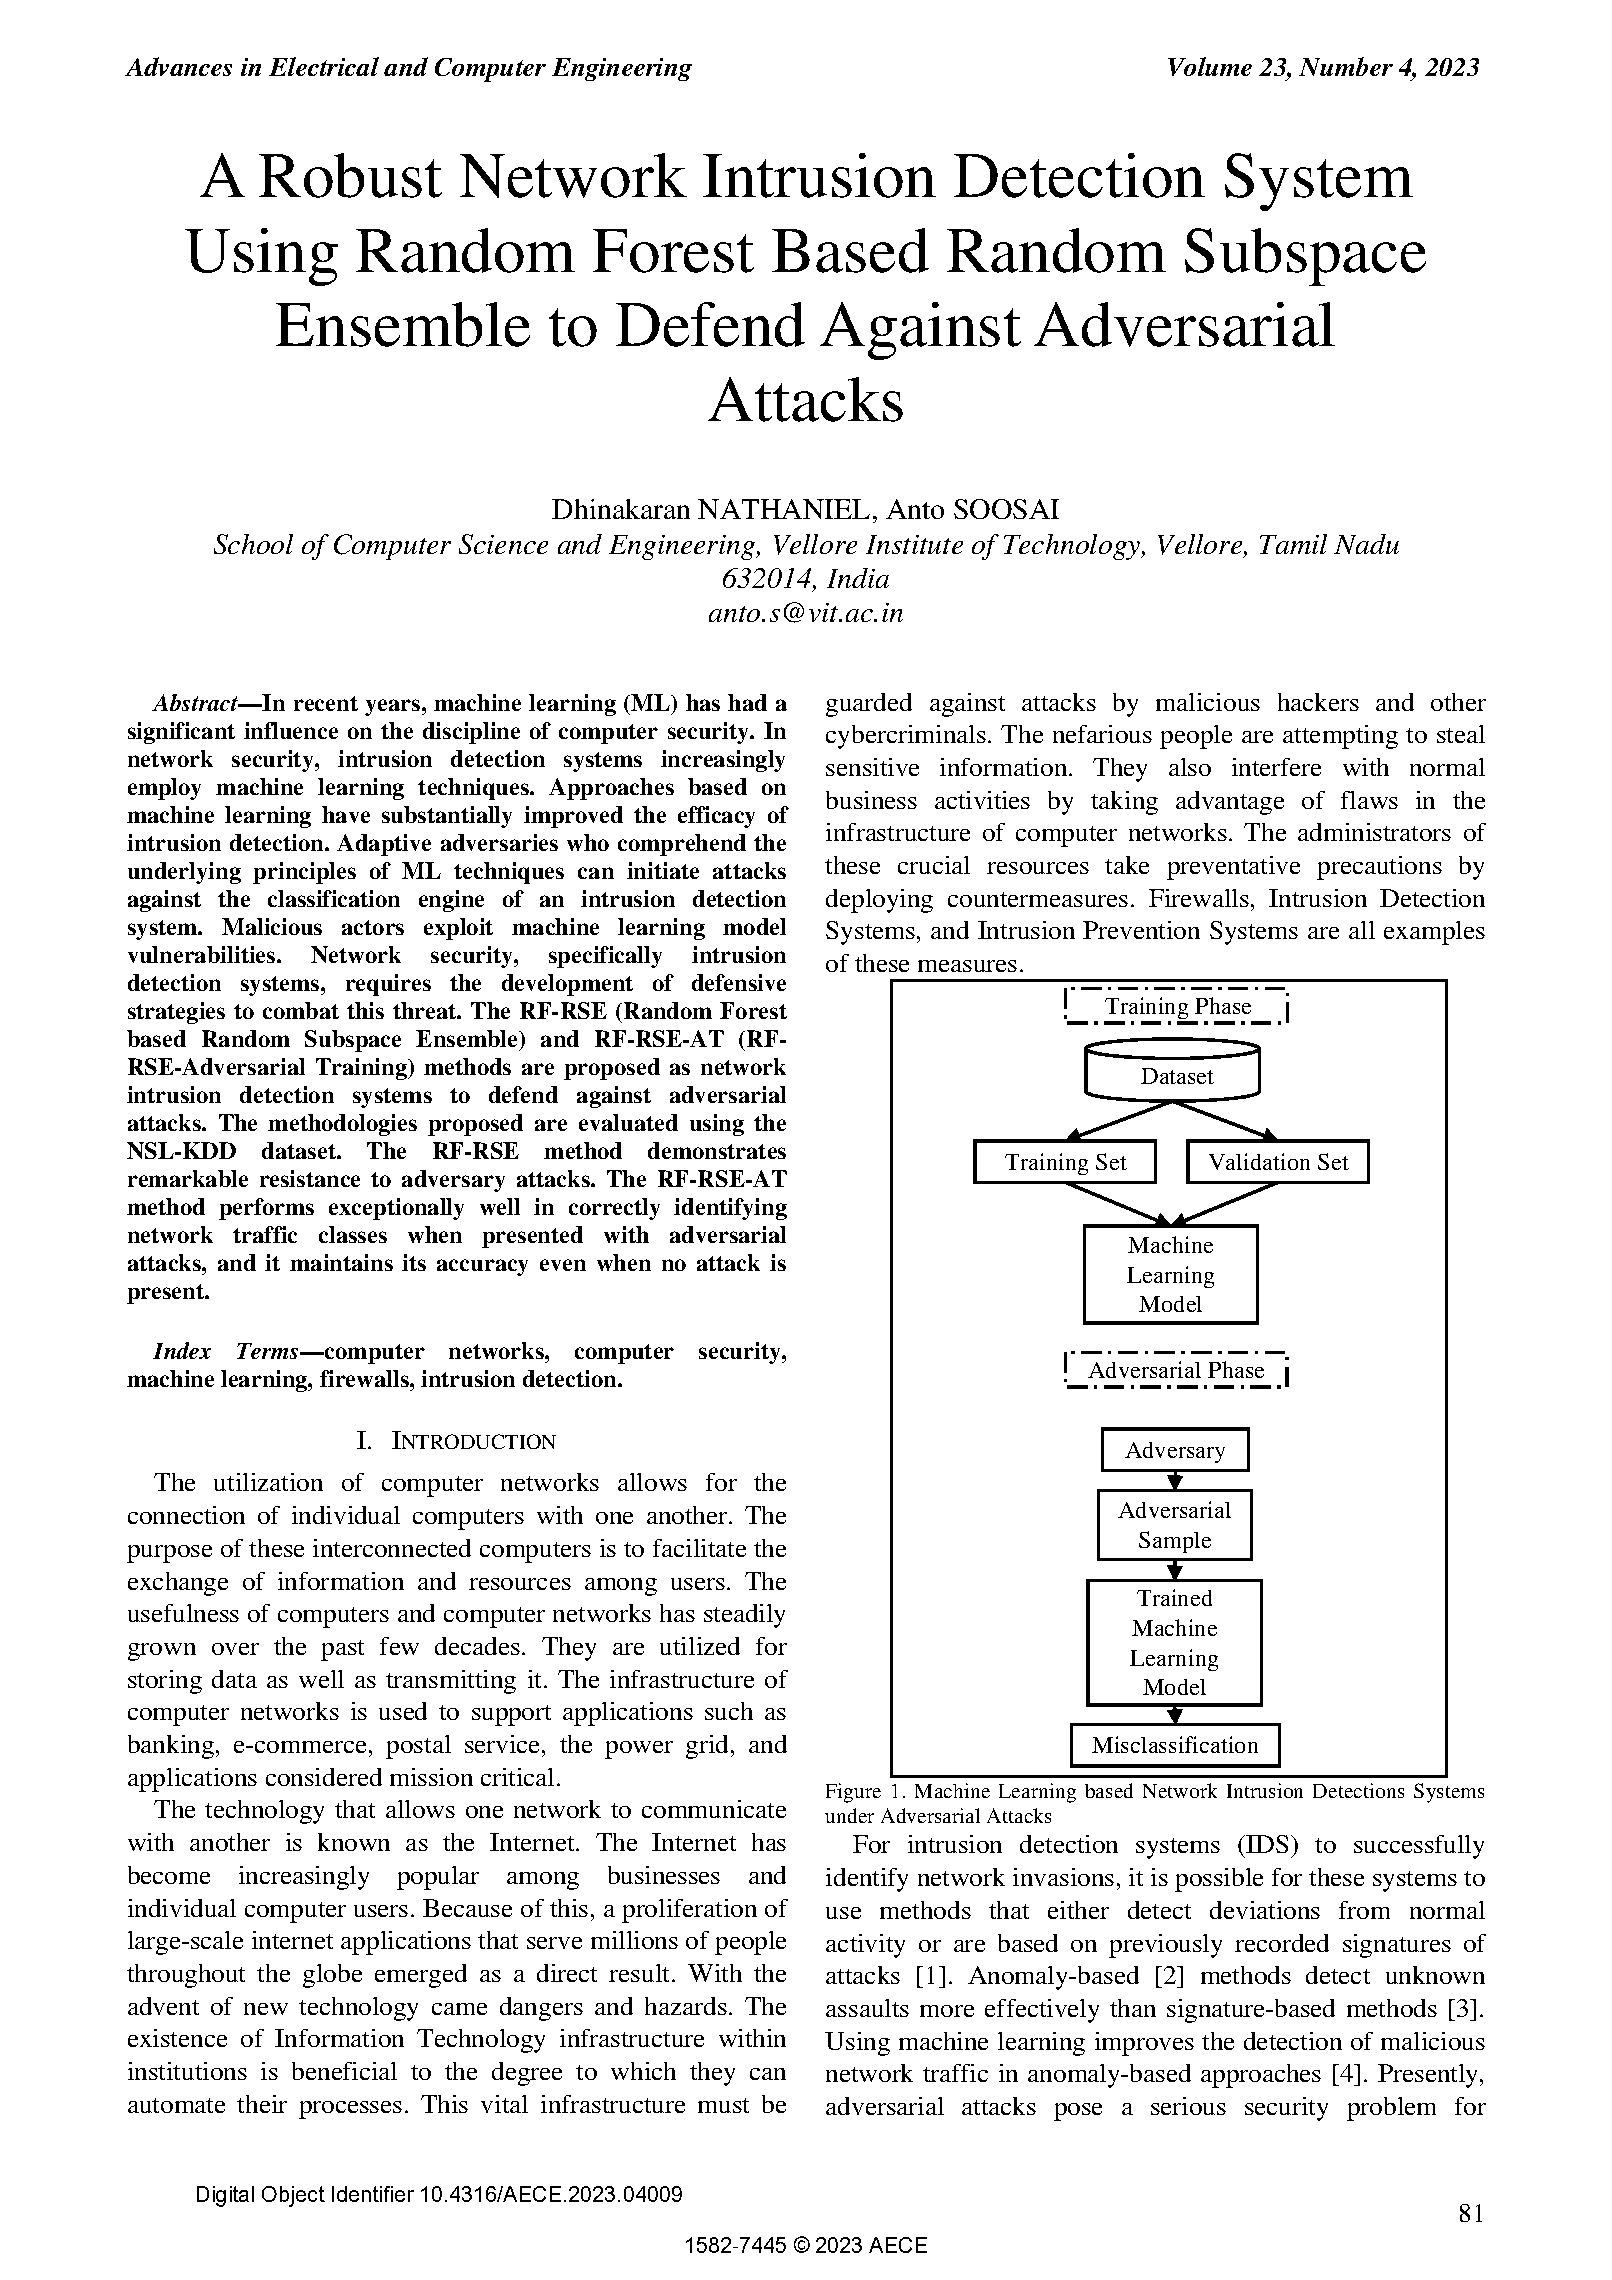 PDF Quickview for paper with DOI:10.4316/AECE.2023.04009